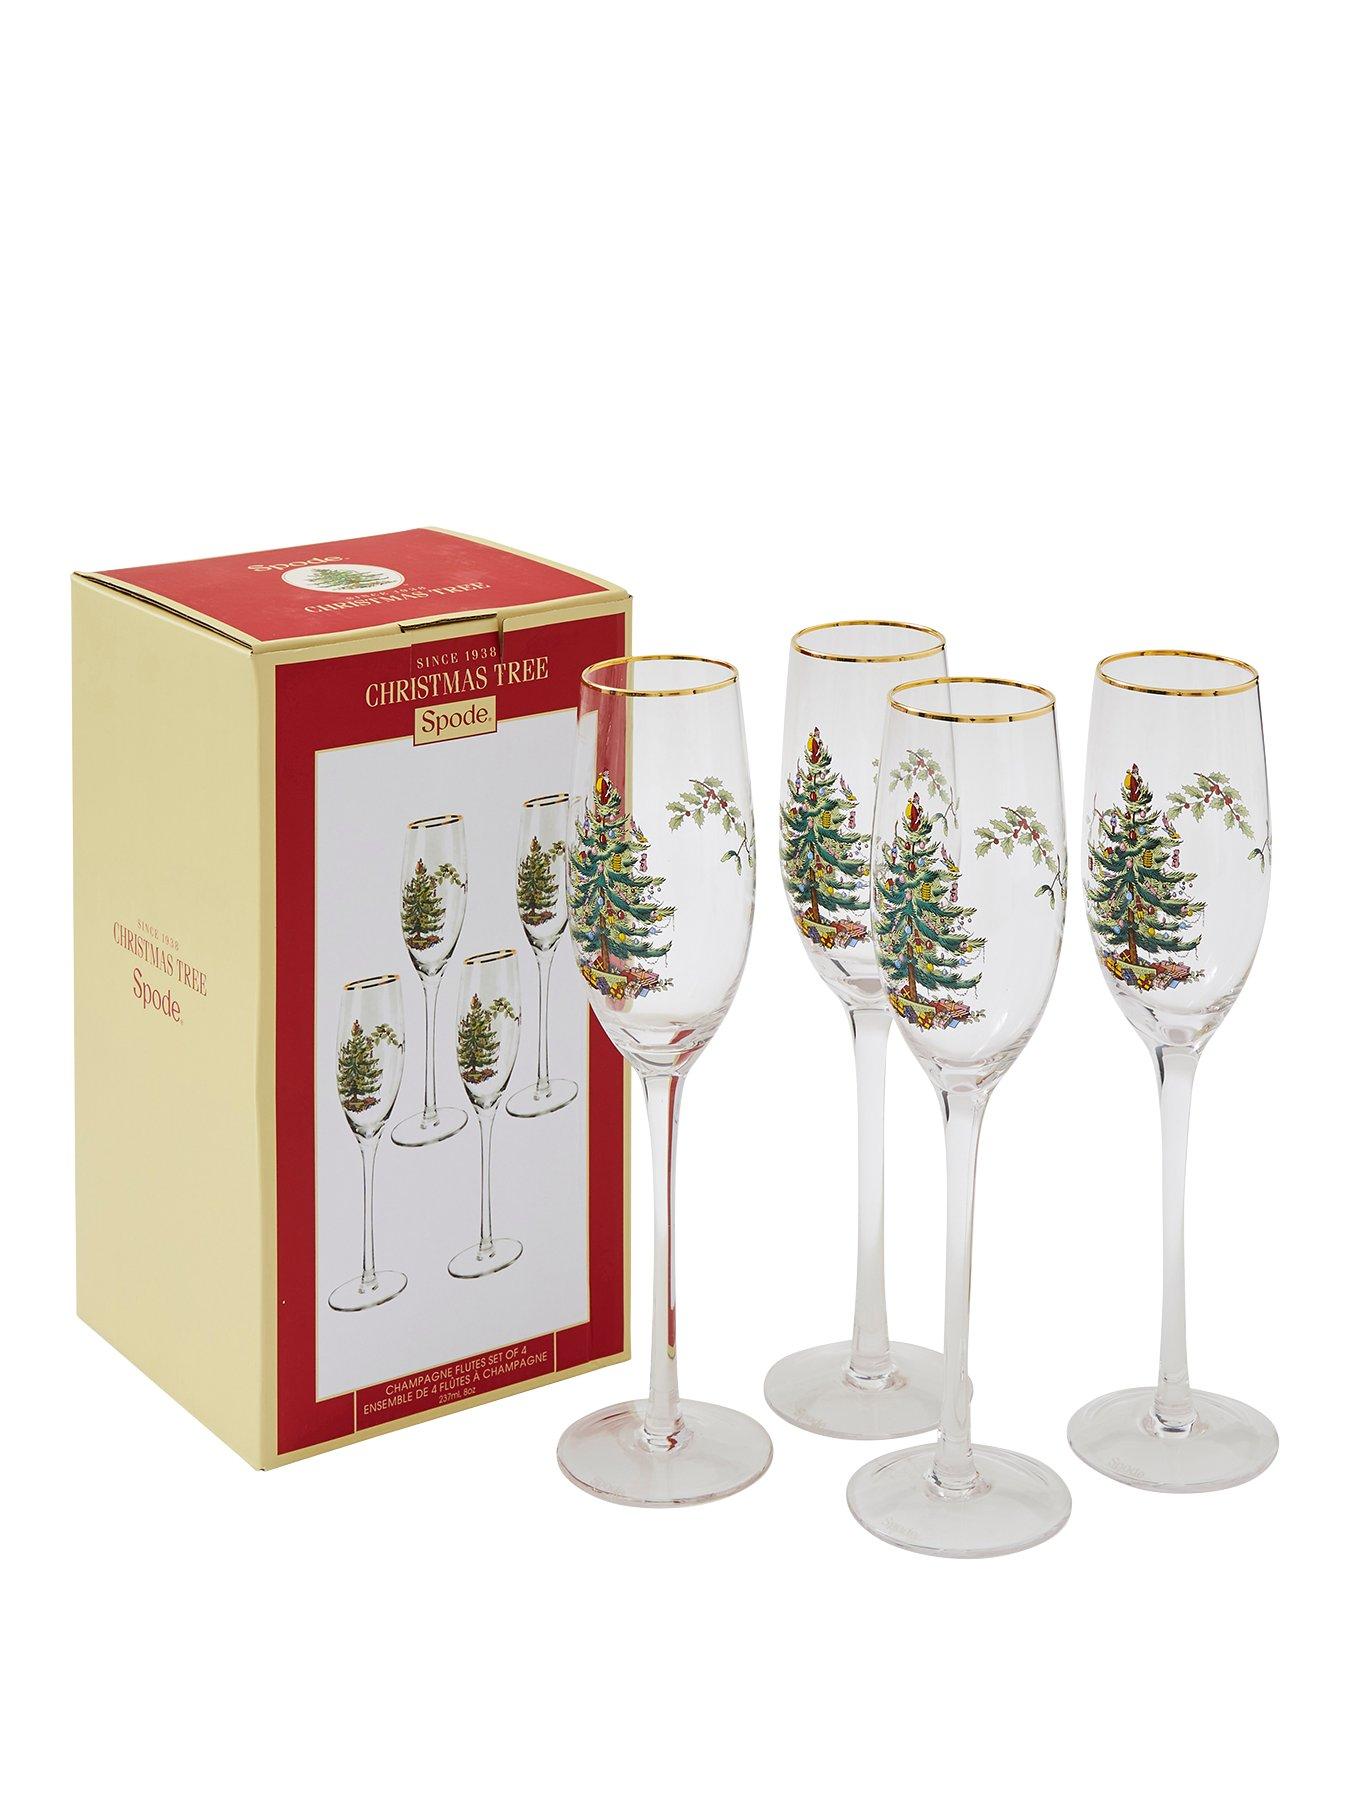 Spode Christmas Tree Glassware - Set of 4 -Made of Glass – Gold Rim-  Classic Drinkware - Gift for Christmas, Holidays, or Wedding - Drinking  Glasses